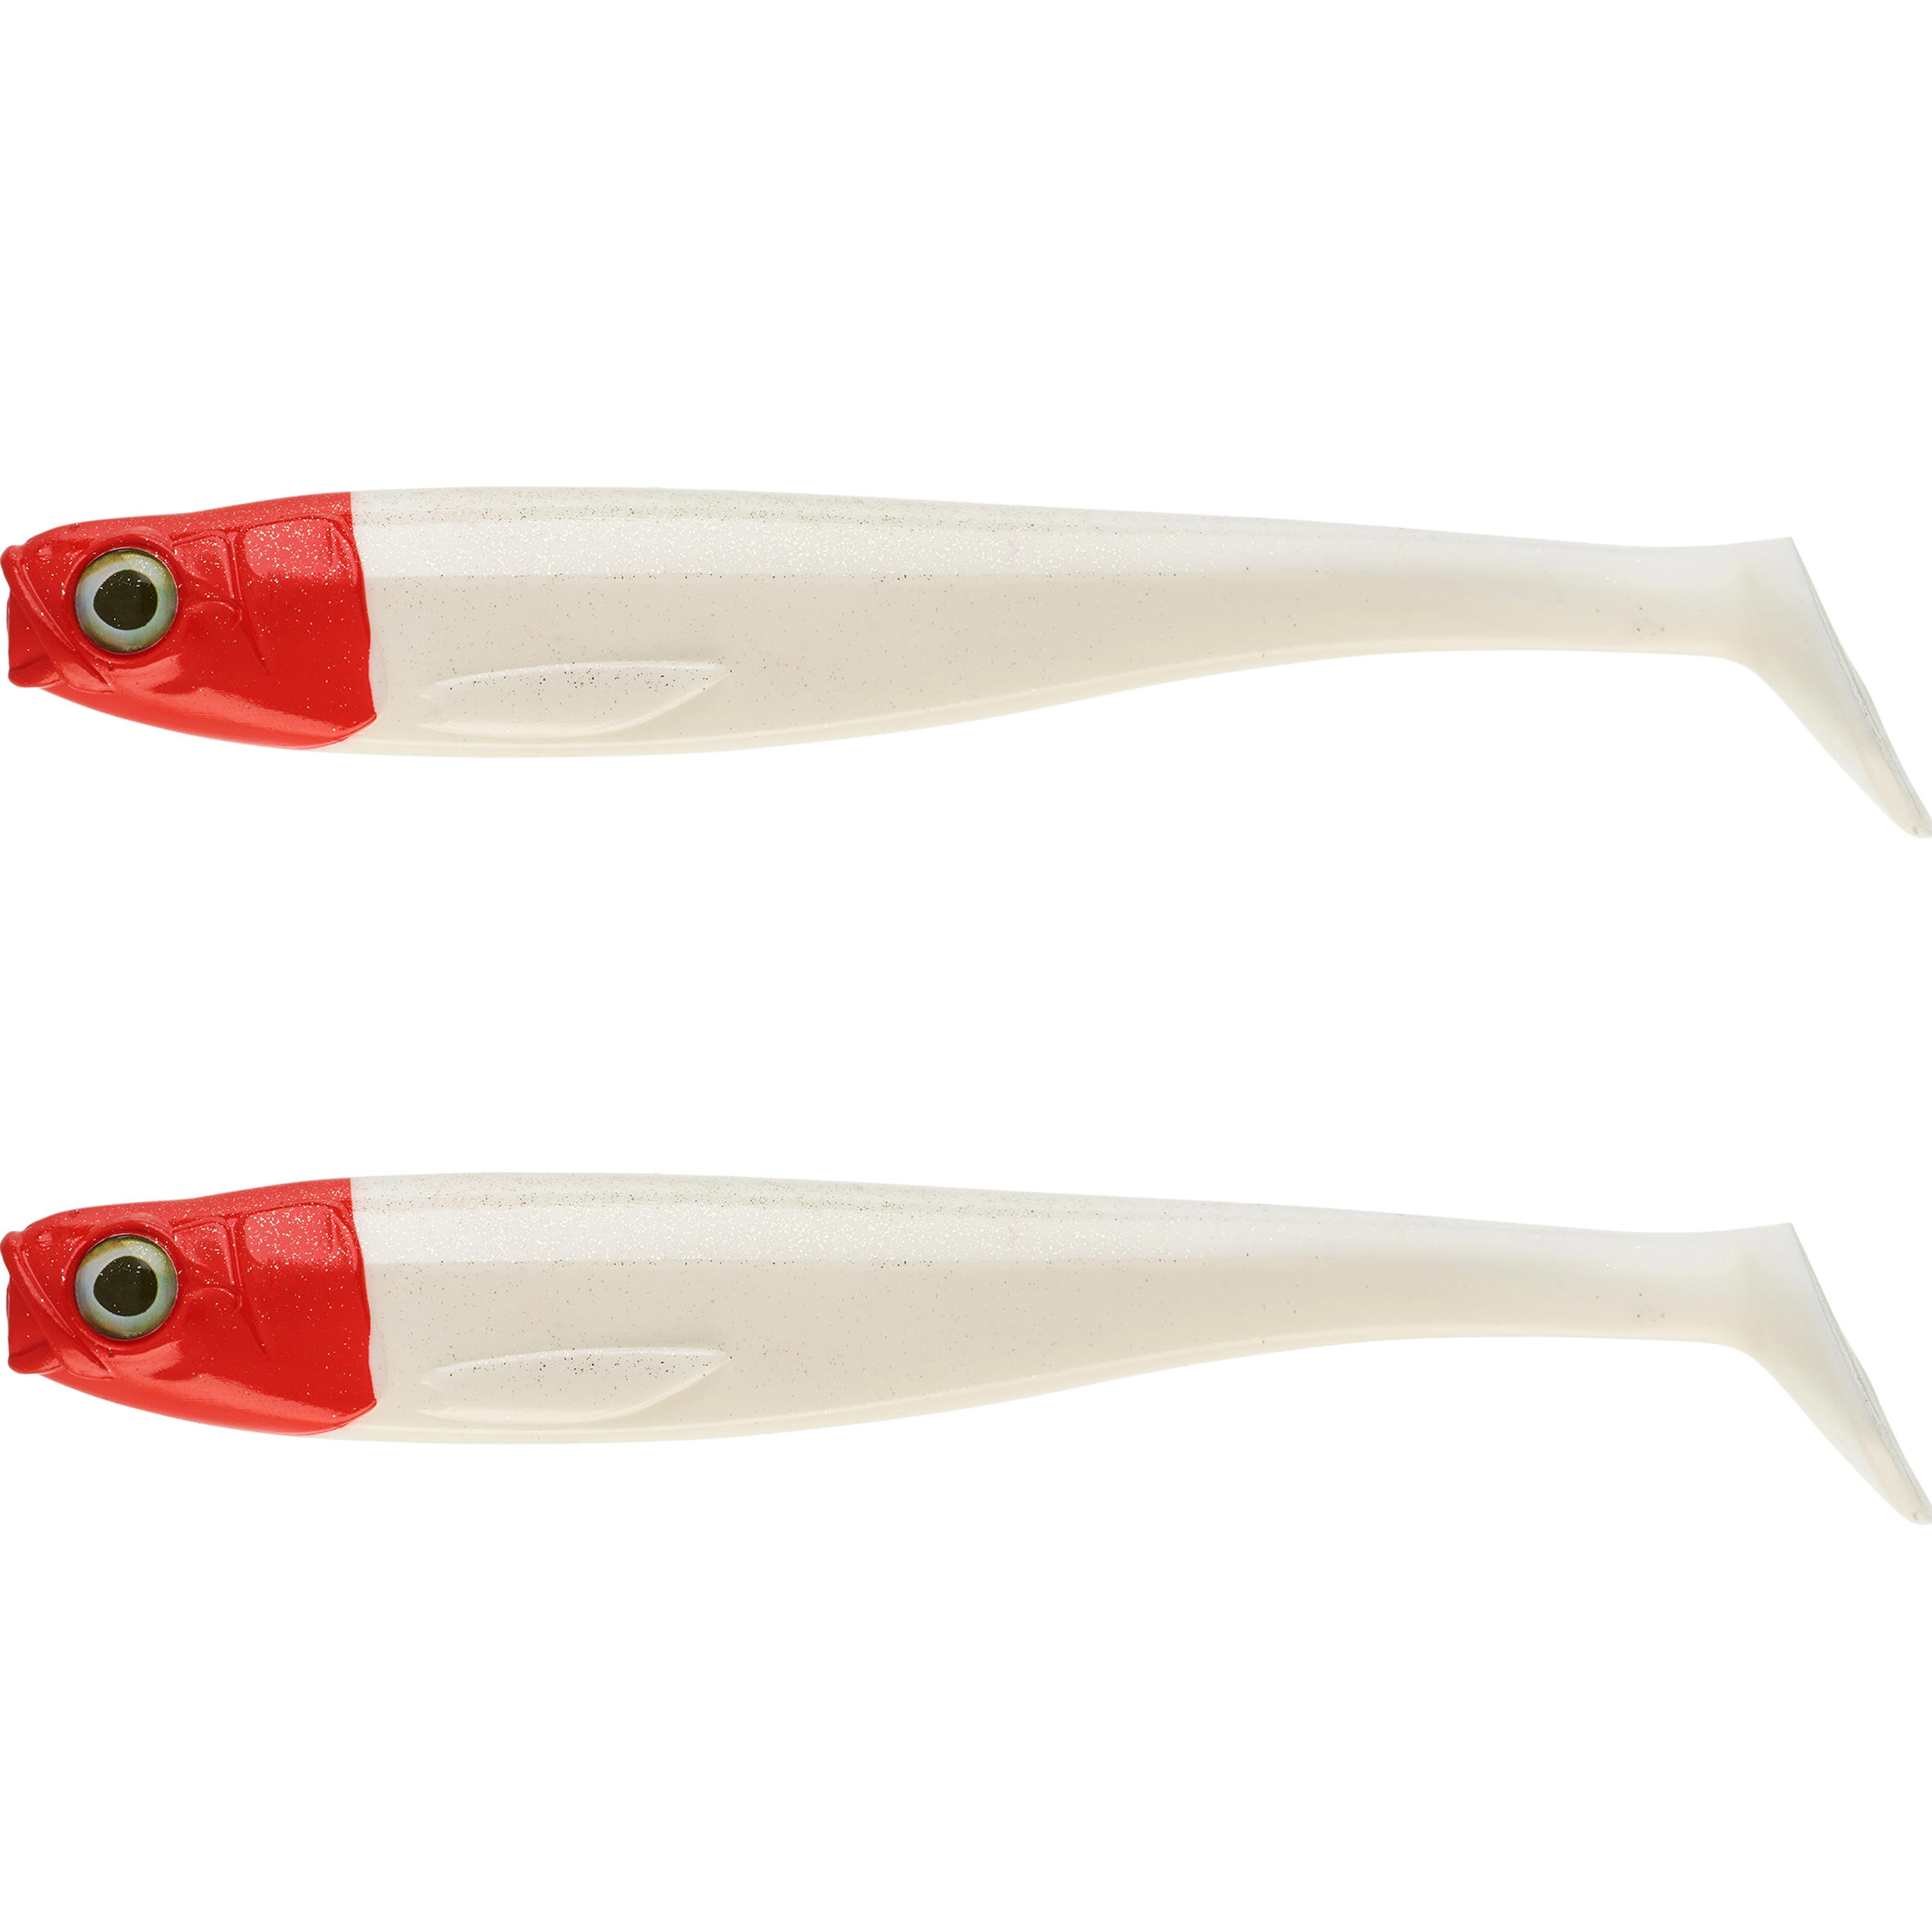 SOFT LURE FISHING LURE ROGEN 120 RED HEAD X2 1/3